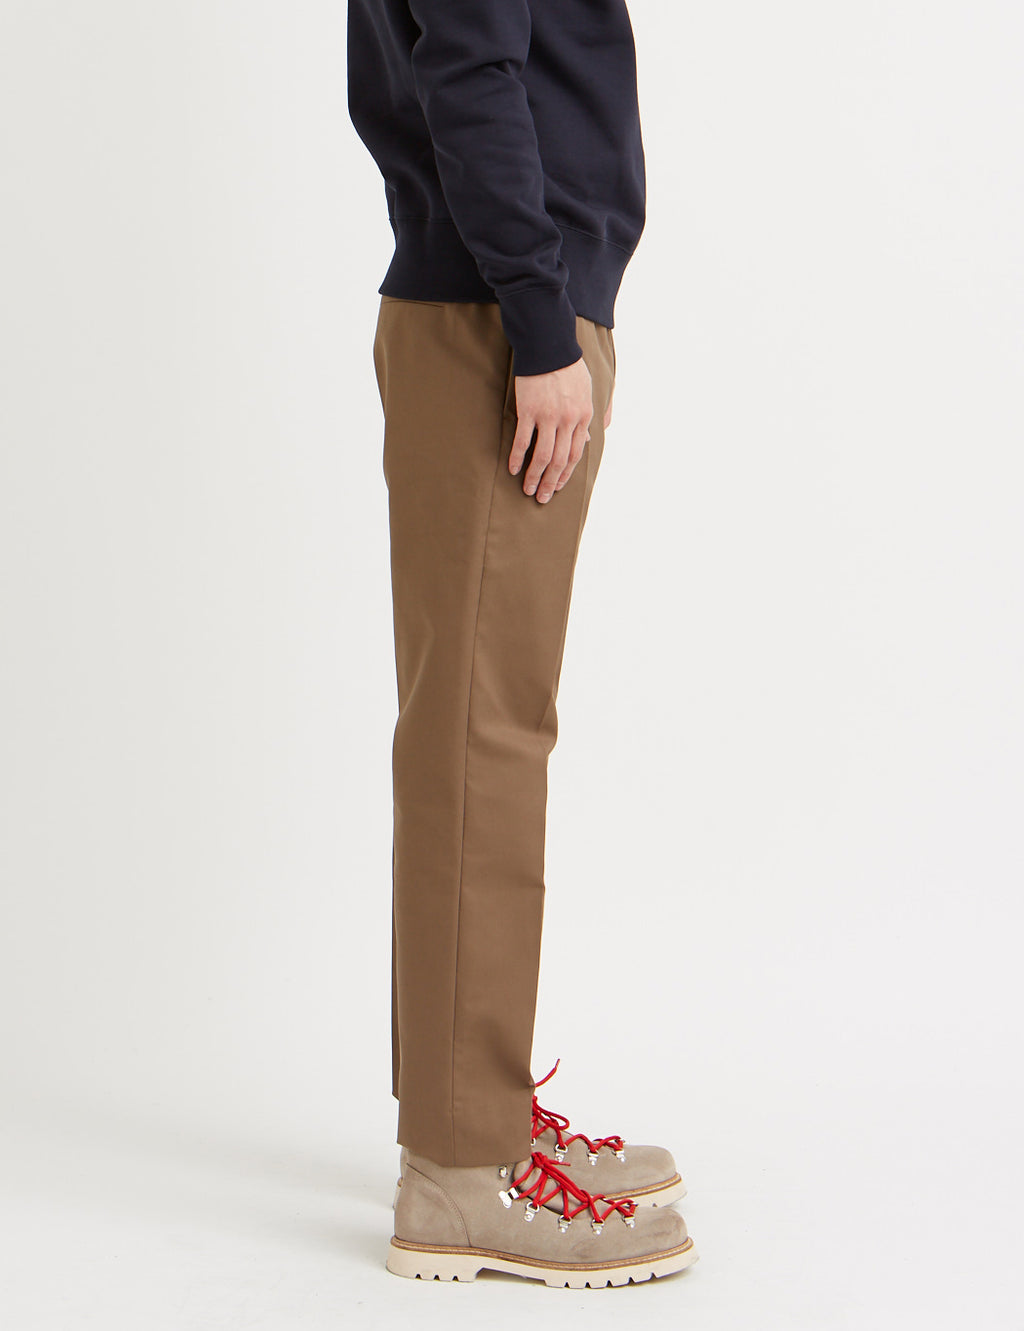 Wood Wood Tristan Trousers - Brown | URBAN EXCESS.